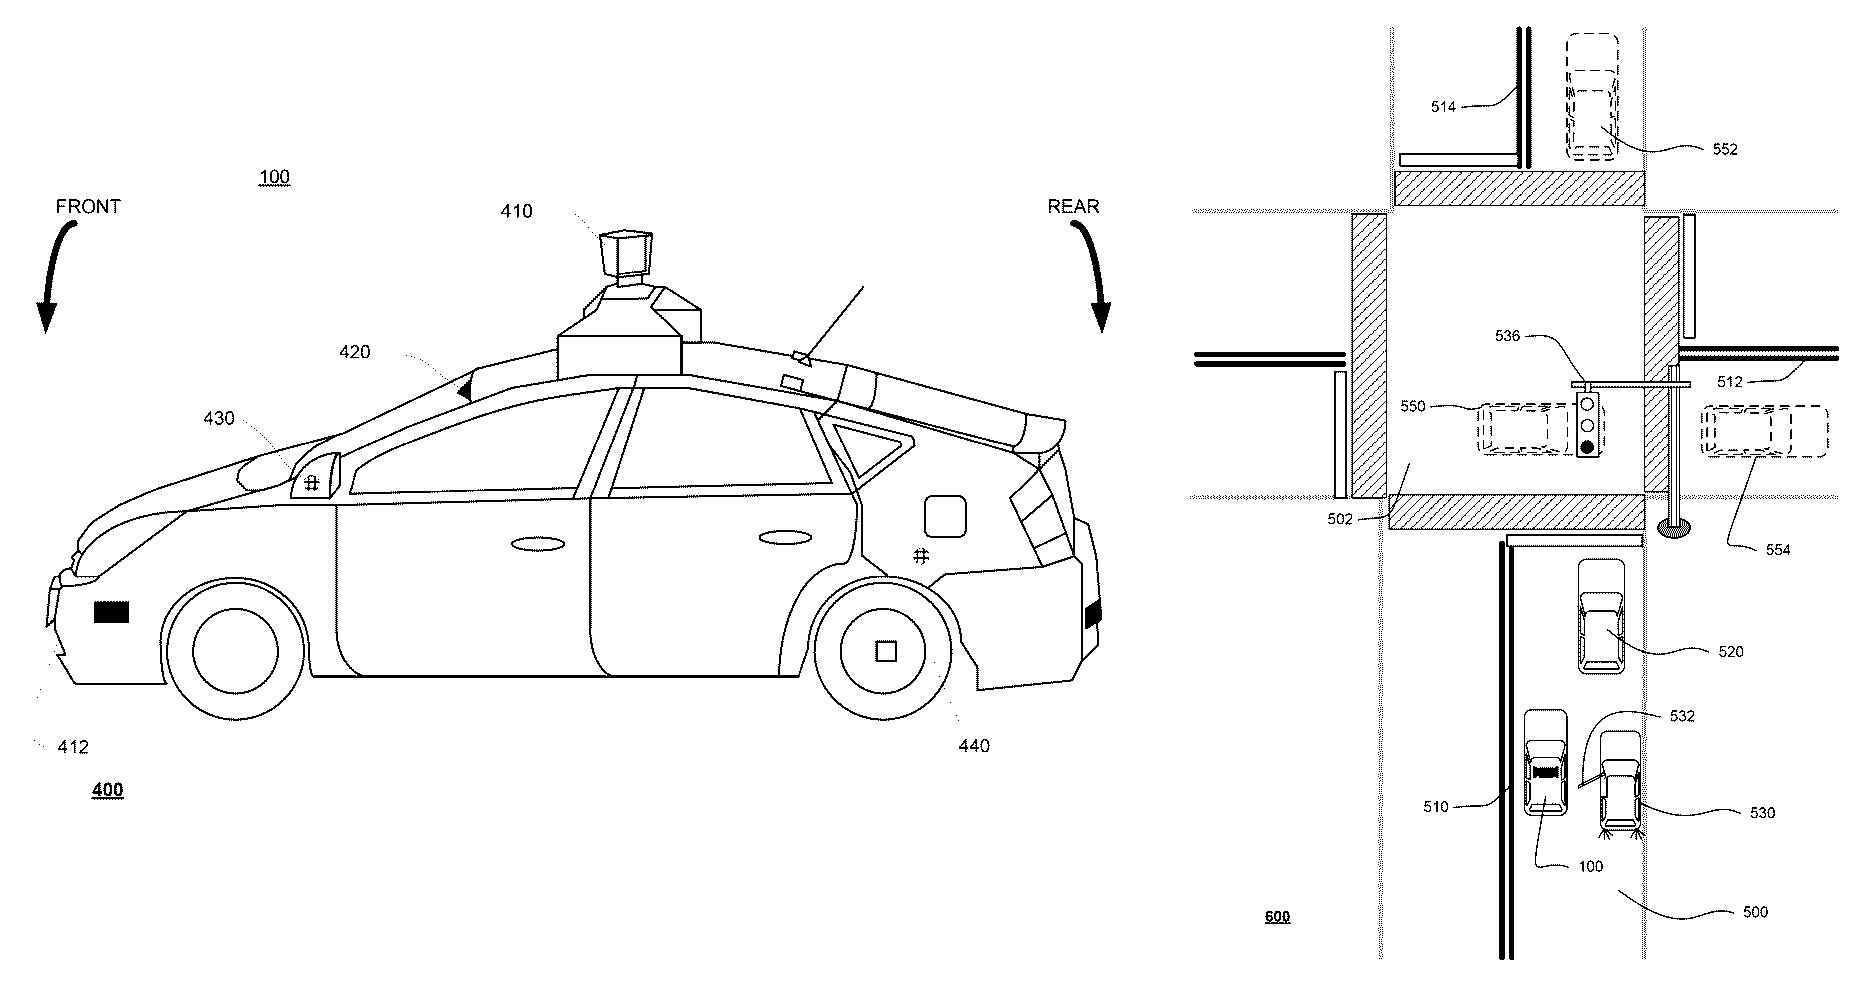 Detecting street parked vehicles